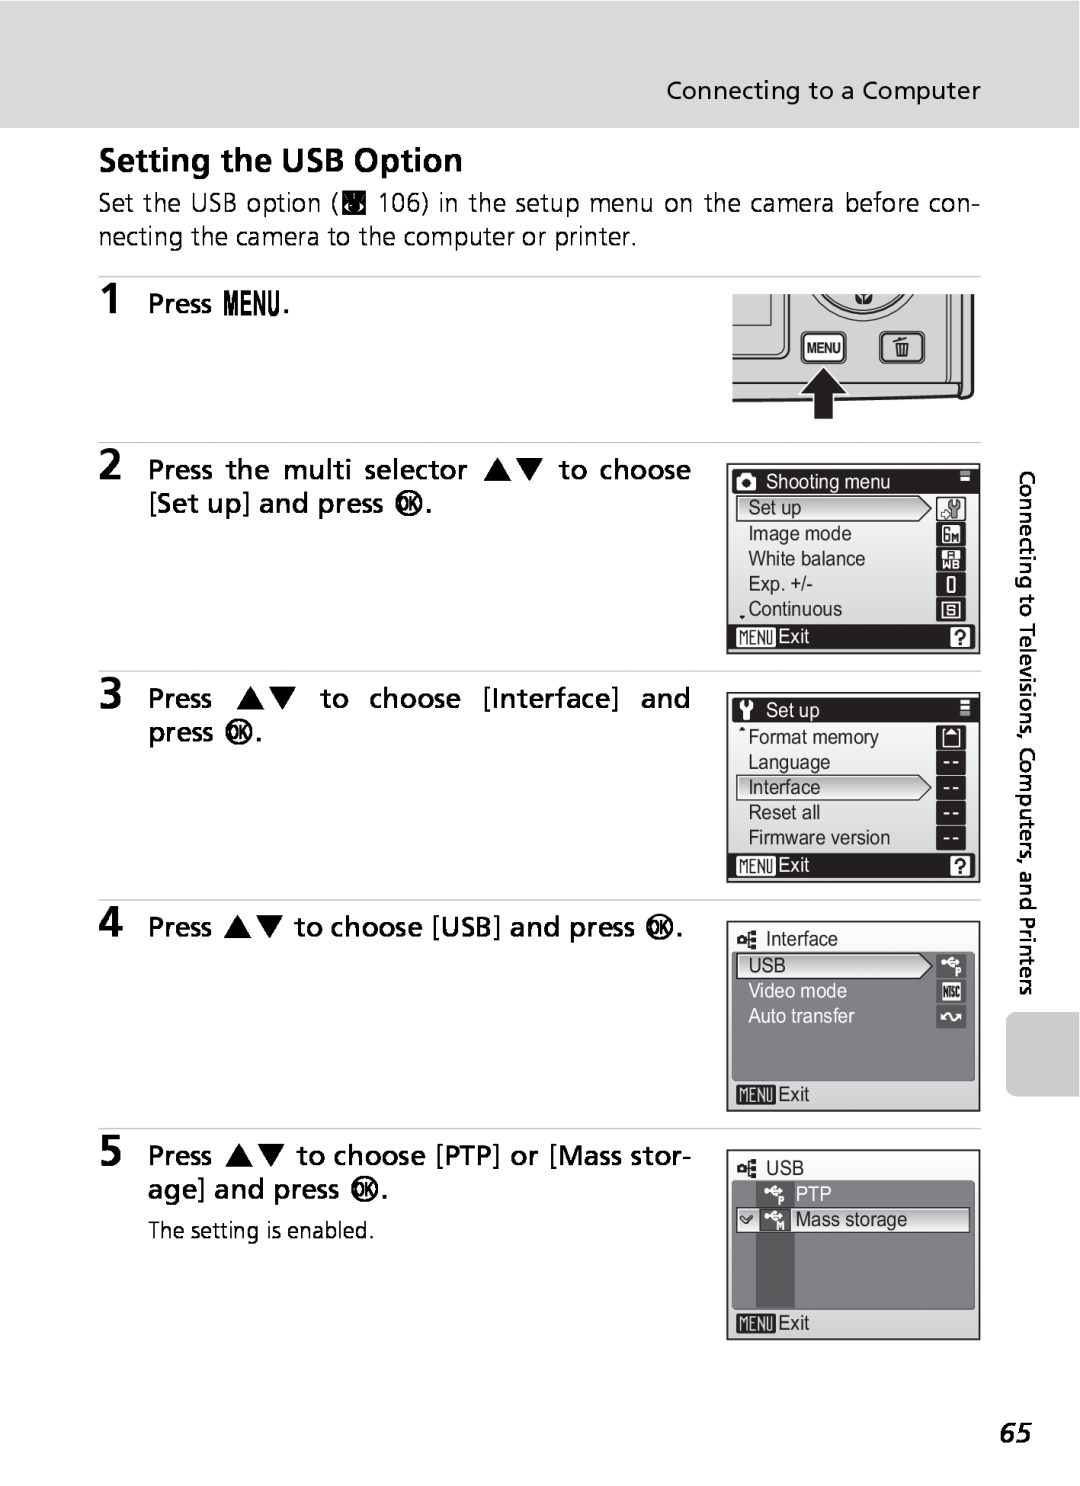 Nikon COOLPIXS9 Setting the USB Option, Press m, Press GH to choose Interface and, Press GH to choose USB and press d 